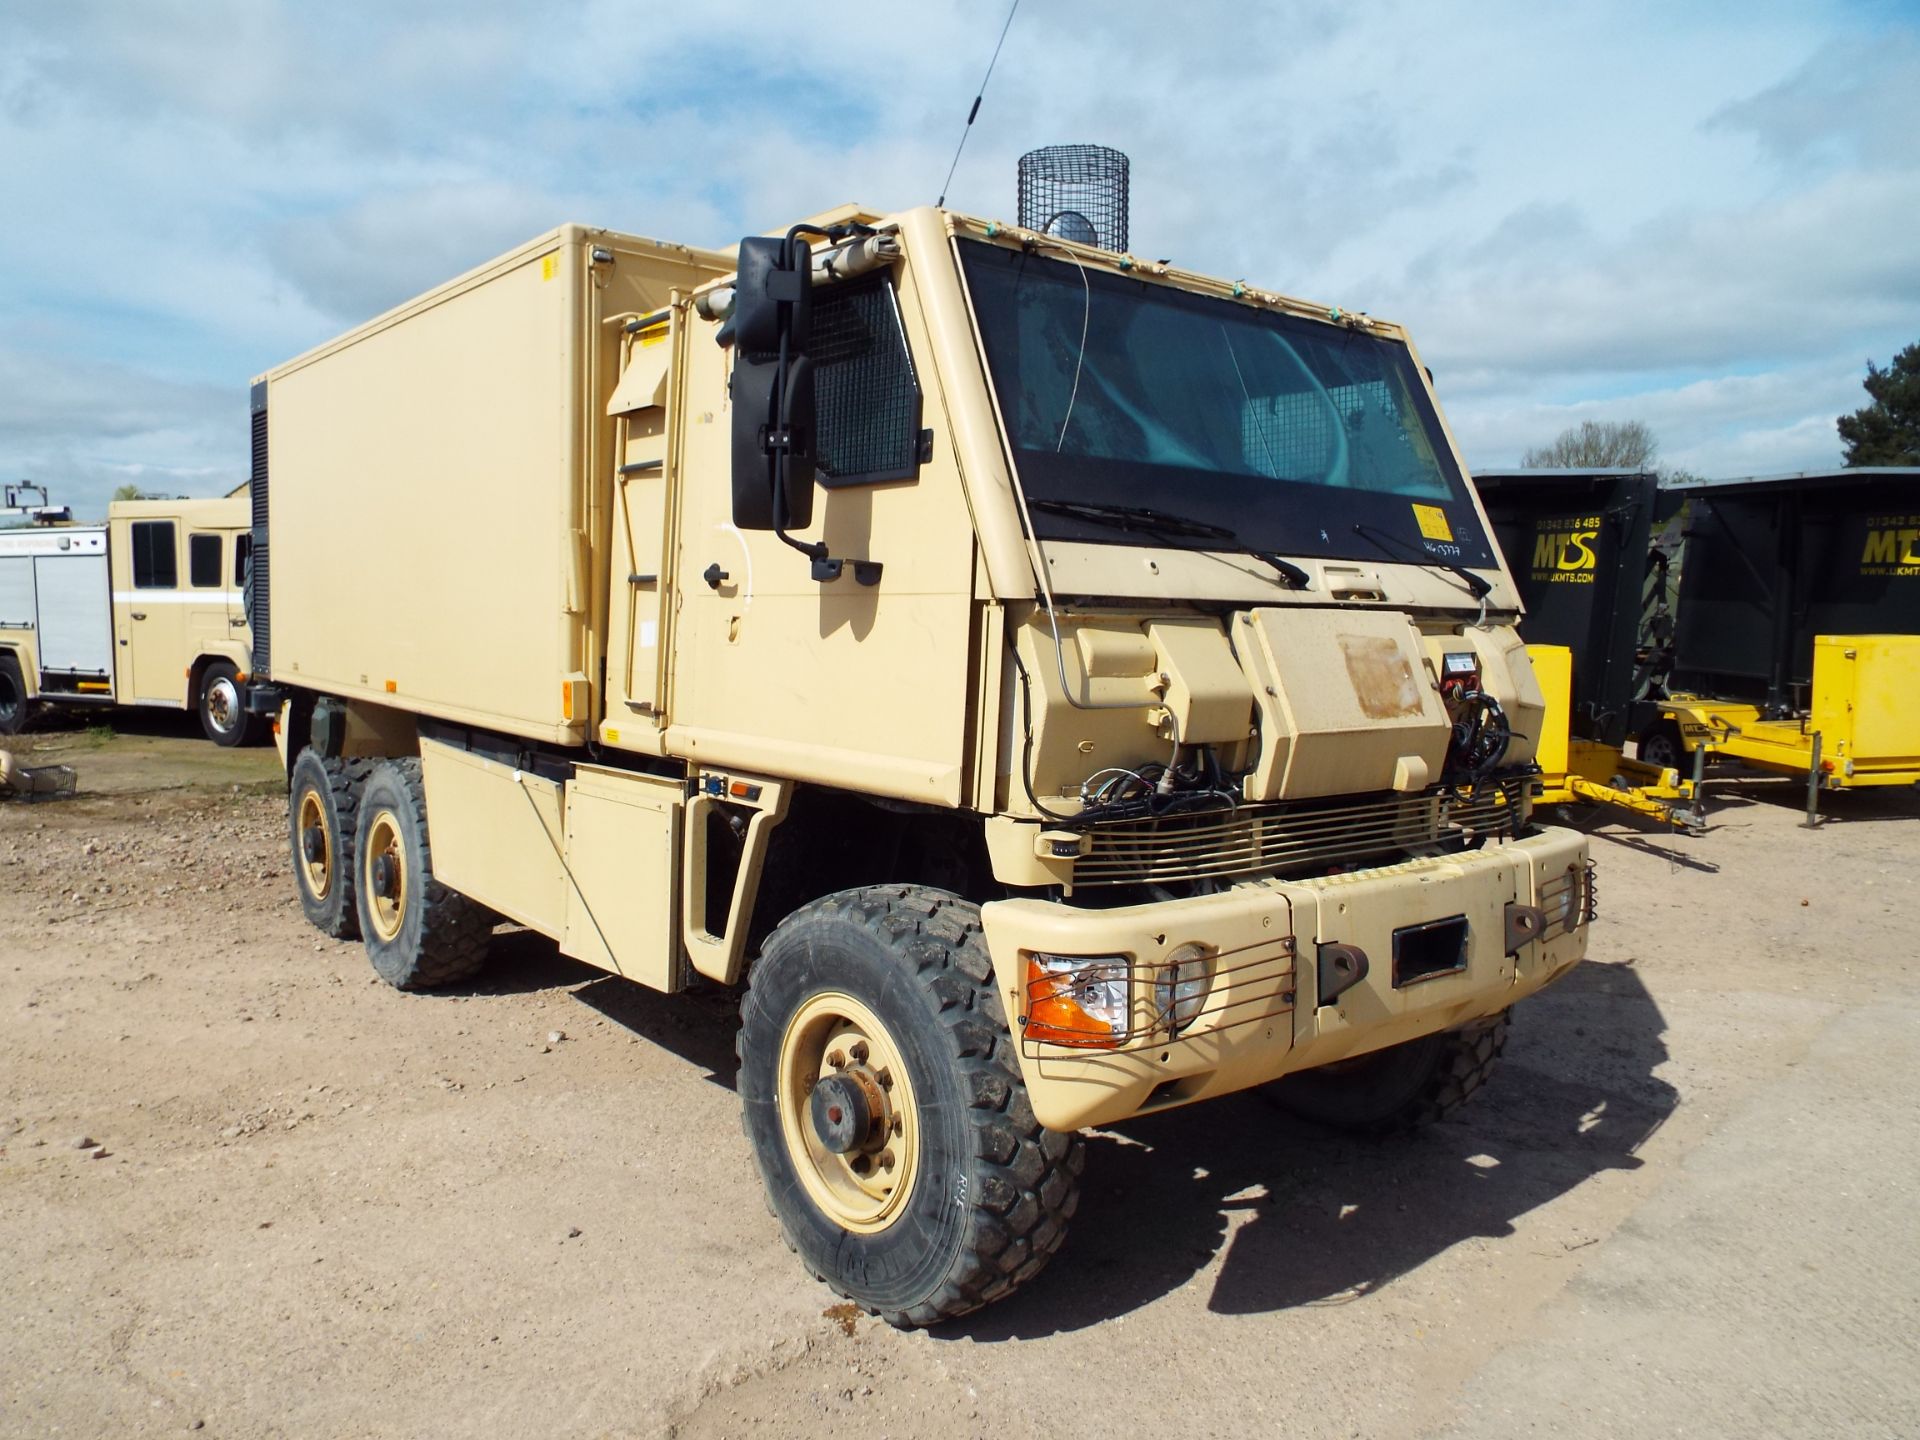 Mowag Bucher Duro III 6x6 High-Mobility Tactical Armoured Vehicle - UK Bidders Only!